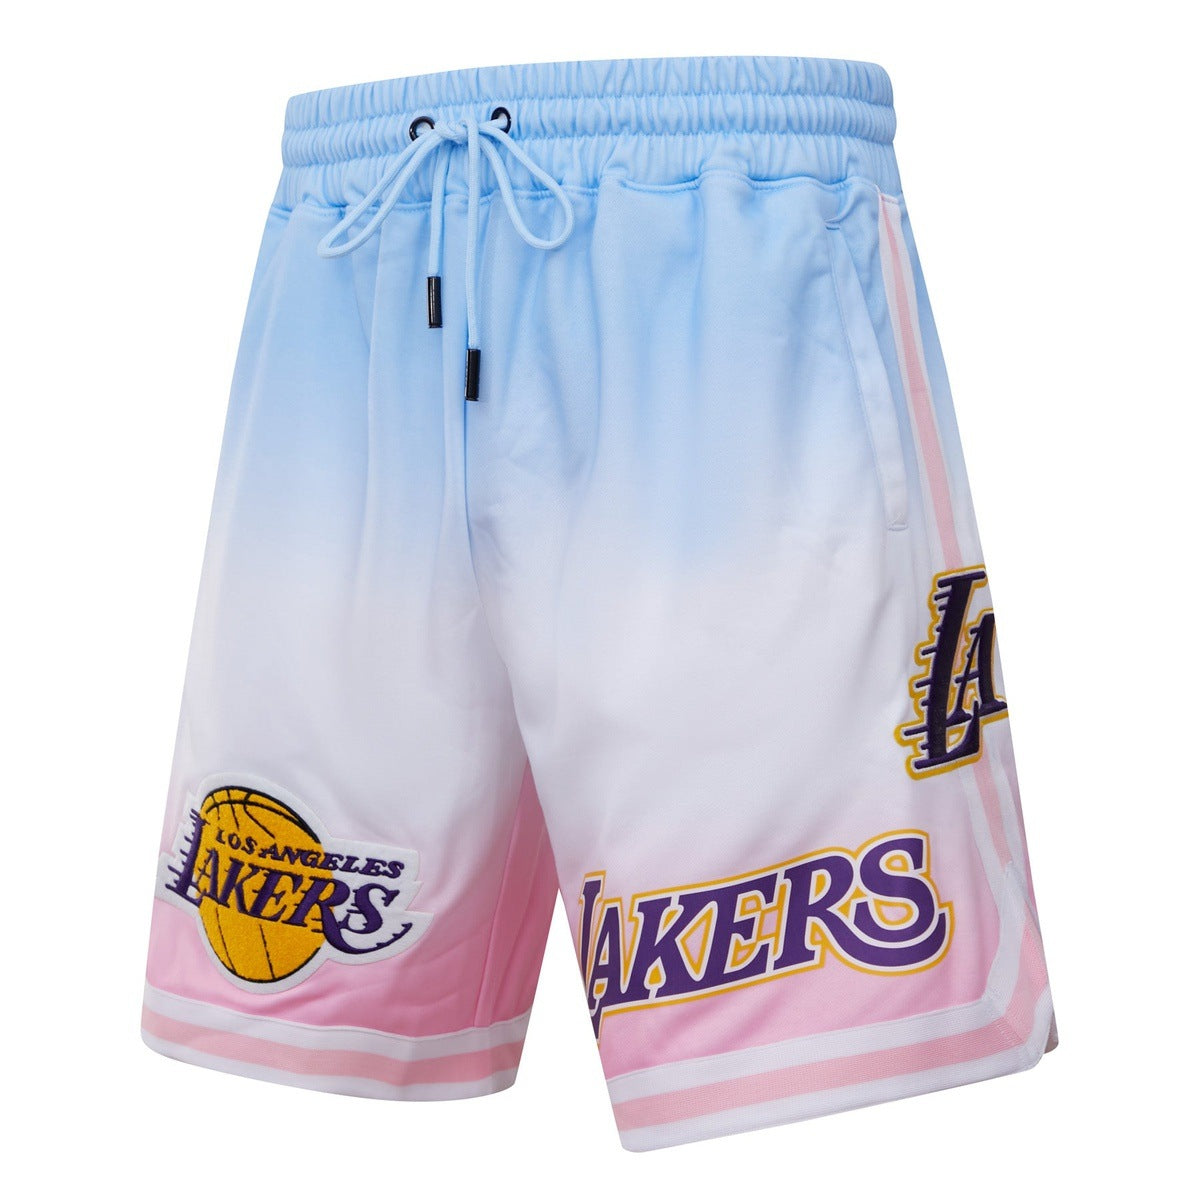 LOS ANGELES LAKERS LOGO PRO TEAM SHORT OMBRE (BLUE/WHITE/PINK